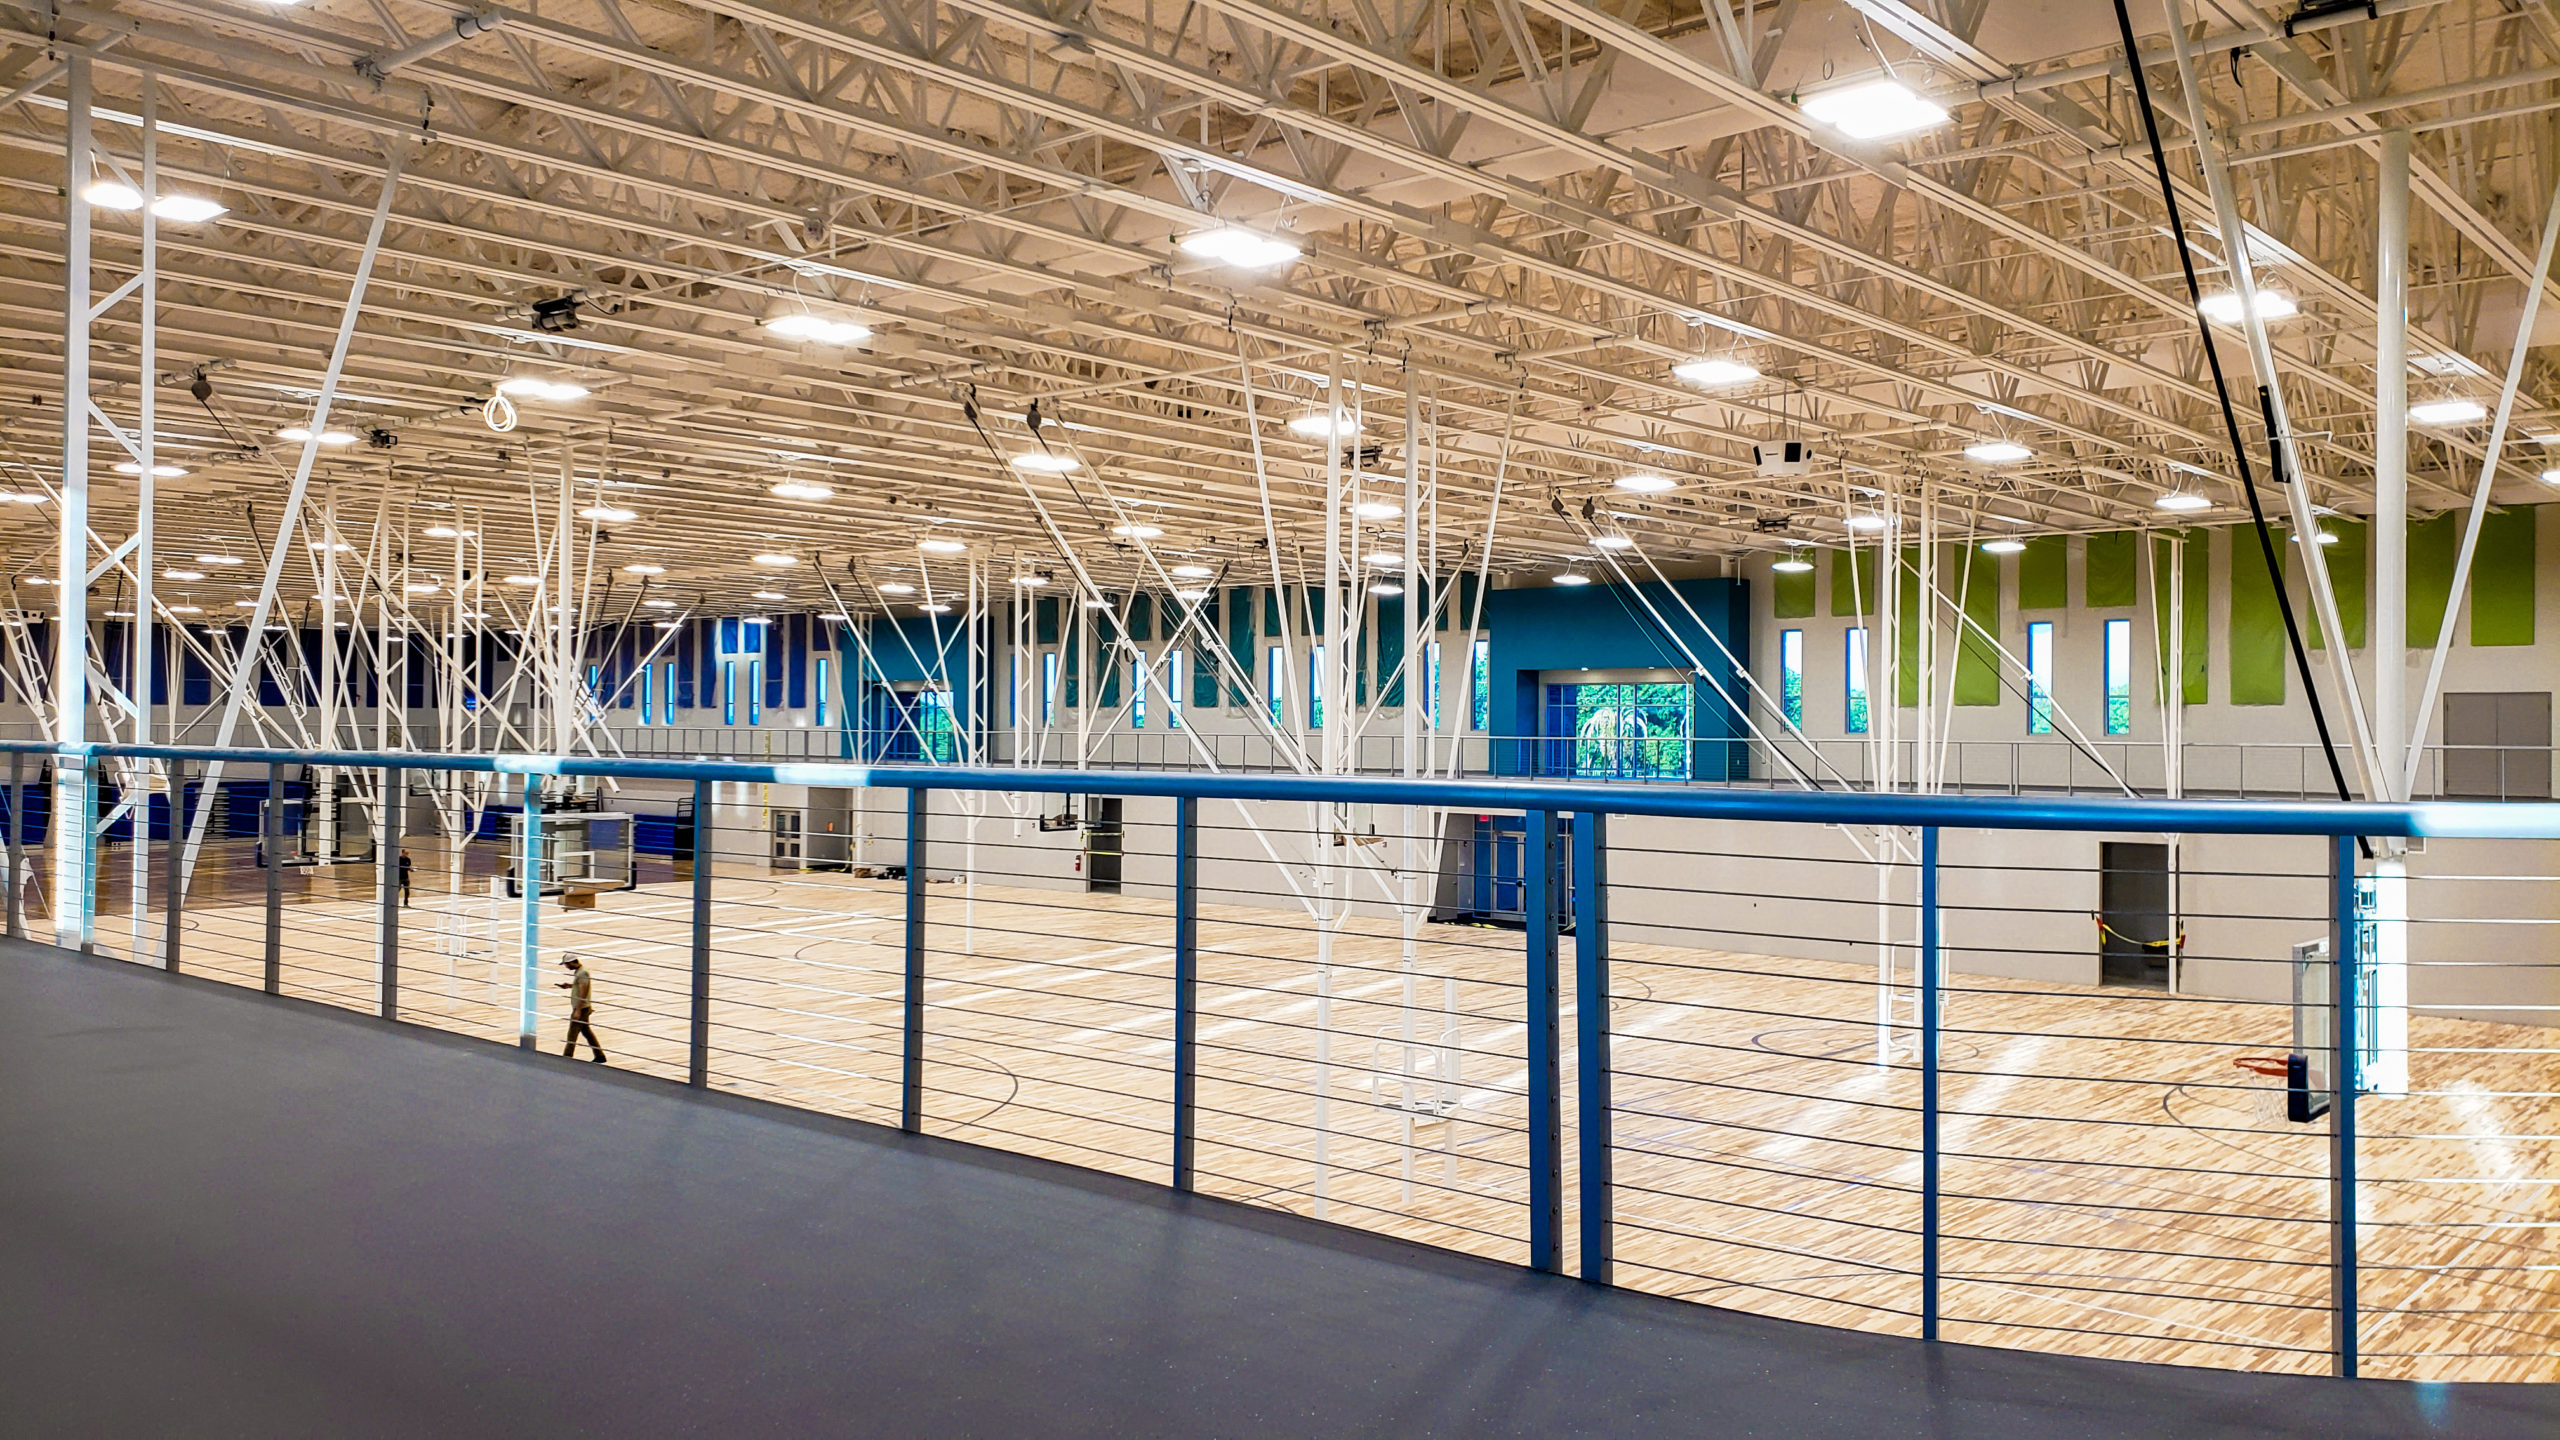 A view of the basketball courts from inside the Winter Haven Fieldhouse and Conference Center